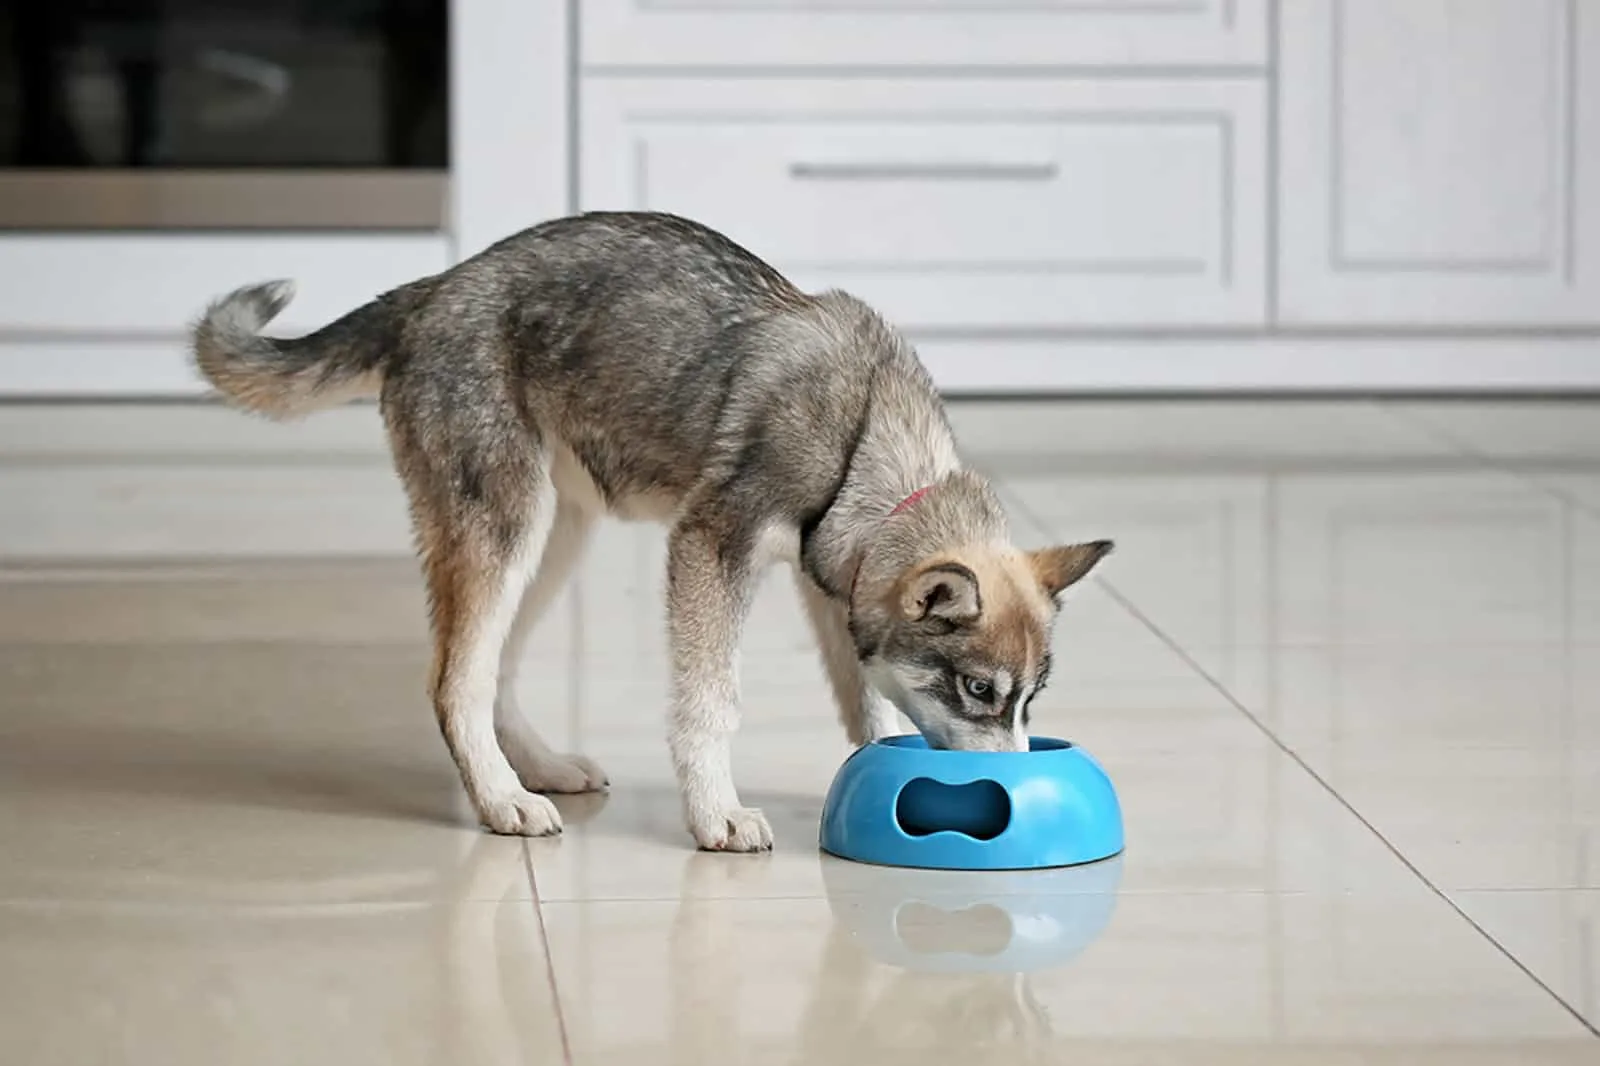 husky eating from a bowl